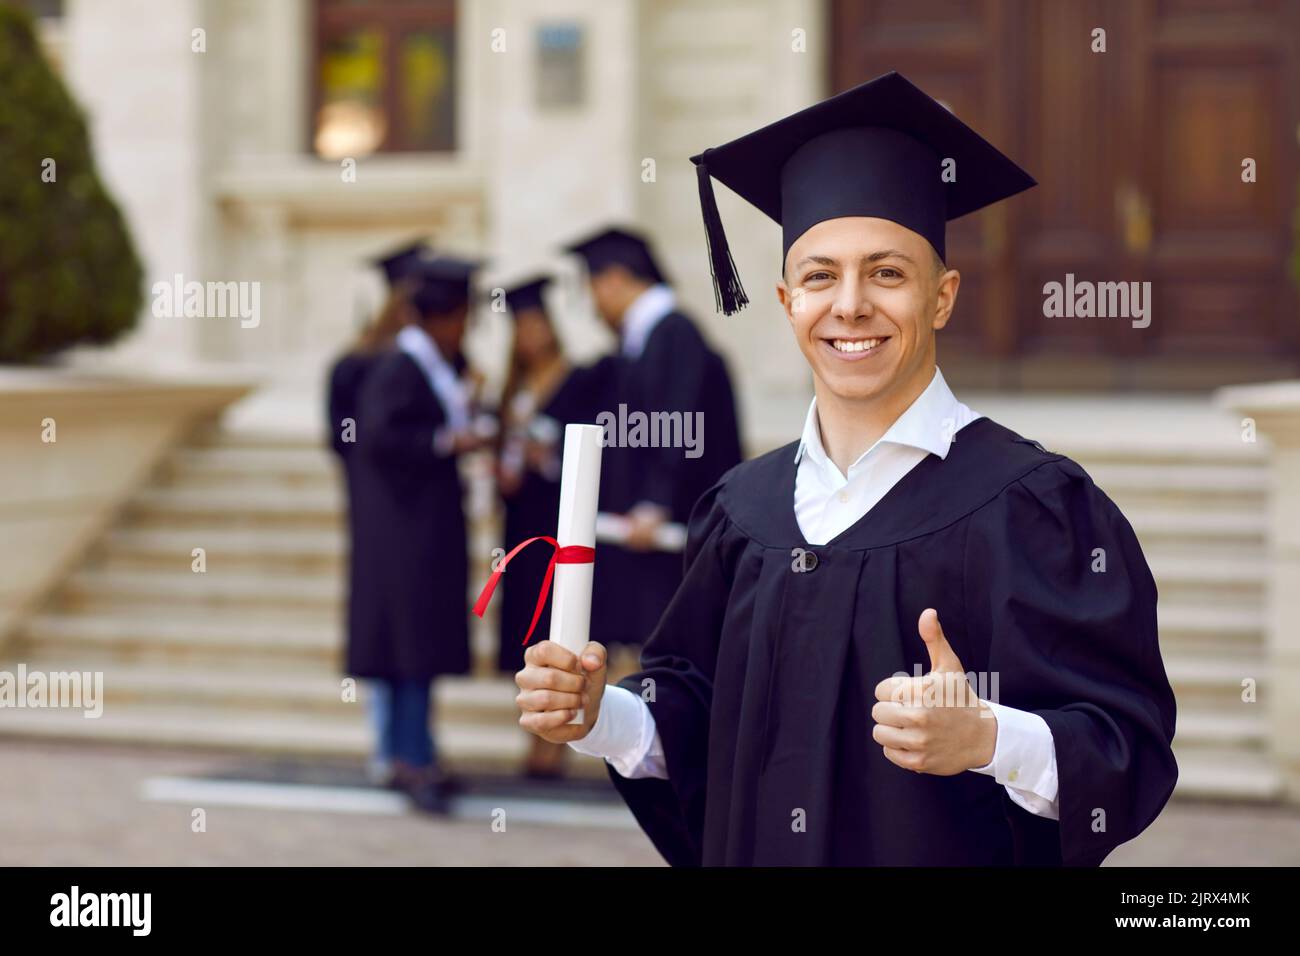 Portrait of joyful male university student with diploma who is doing excellent and approval sign. Stock Photo